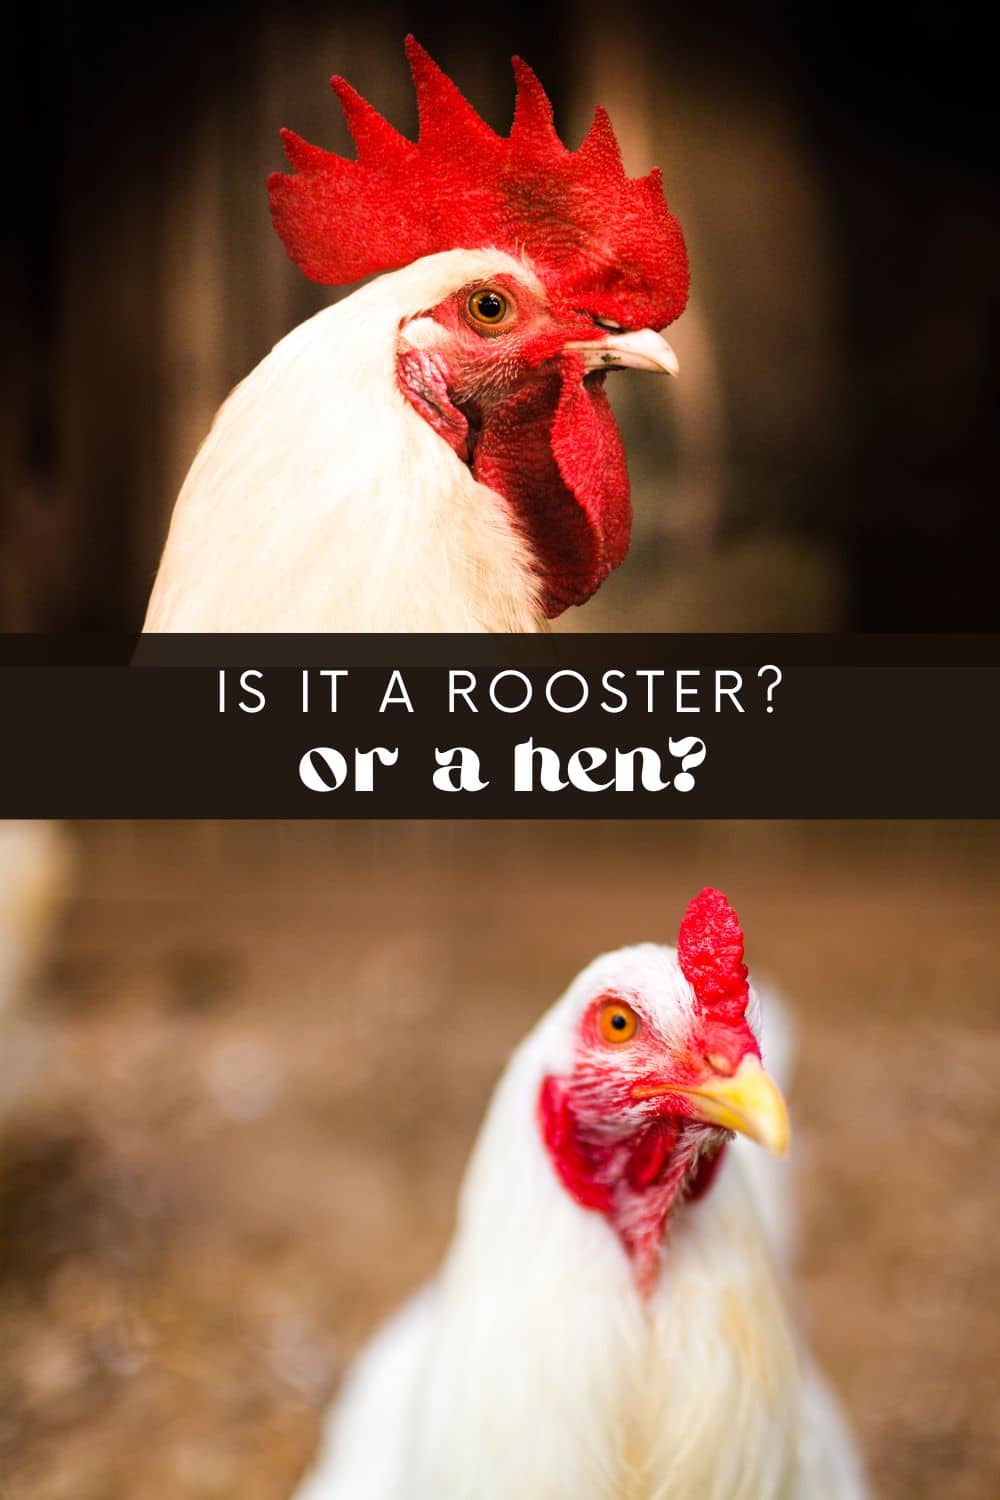 A common misconception is that all chickens are female. While it is true that the majority of chickens raised for eggs are female, there are also male chickens, known as roosters, which play important roles in both the commercial poultry industry and backyard chicken owners.